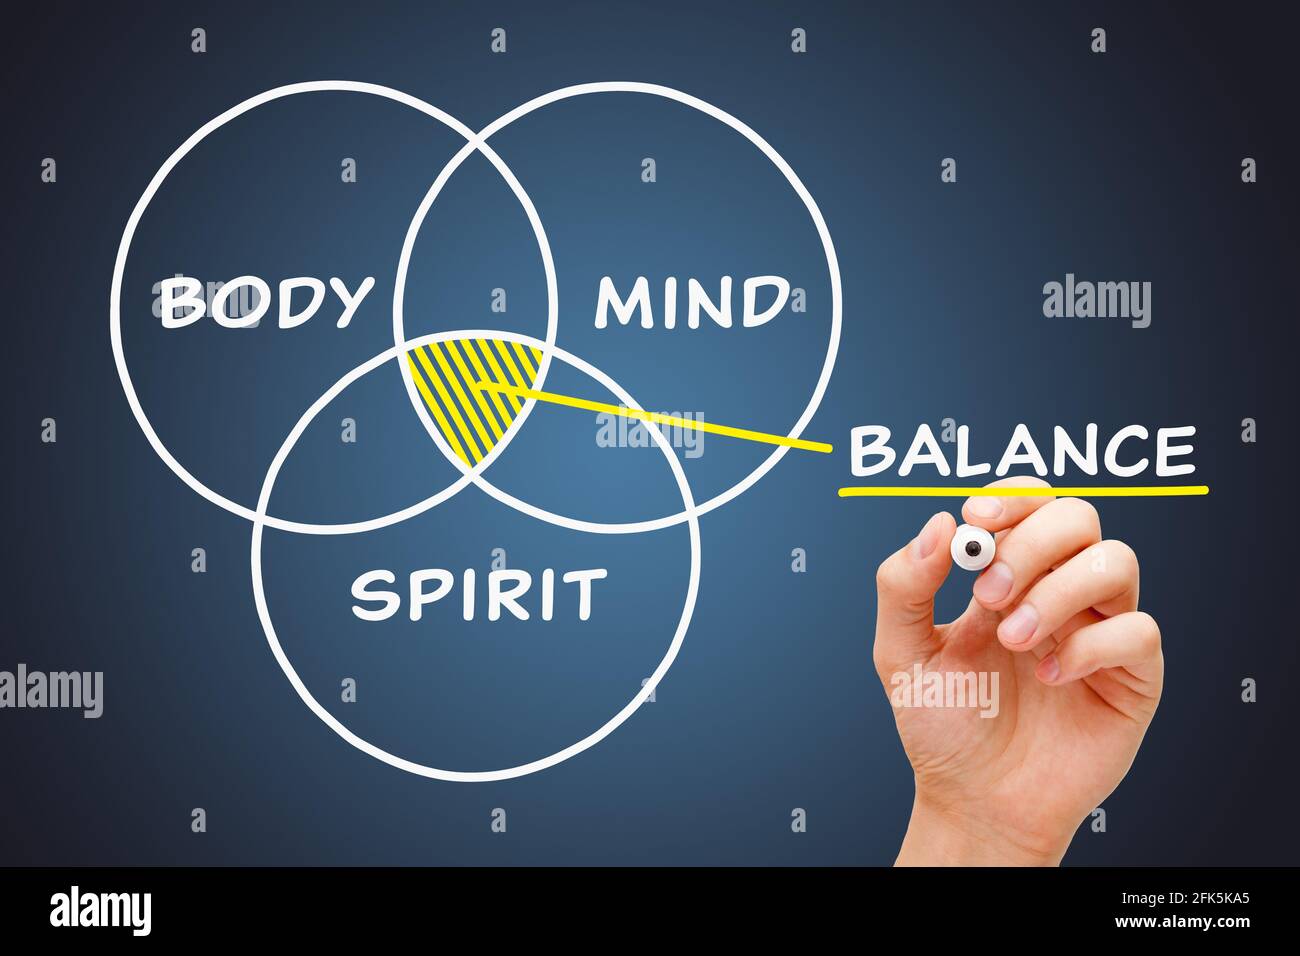 Hand drawing with marker conceptual diagram about the Balance between Body, Mind and Spirit. Stock Photo